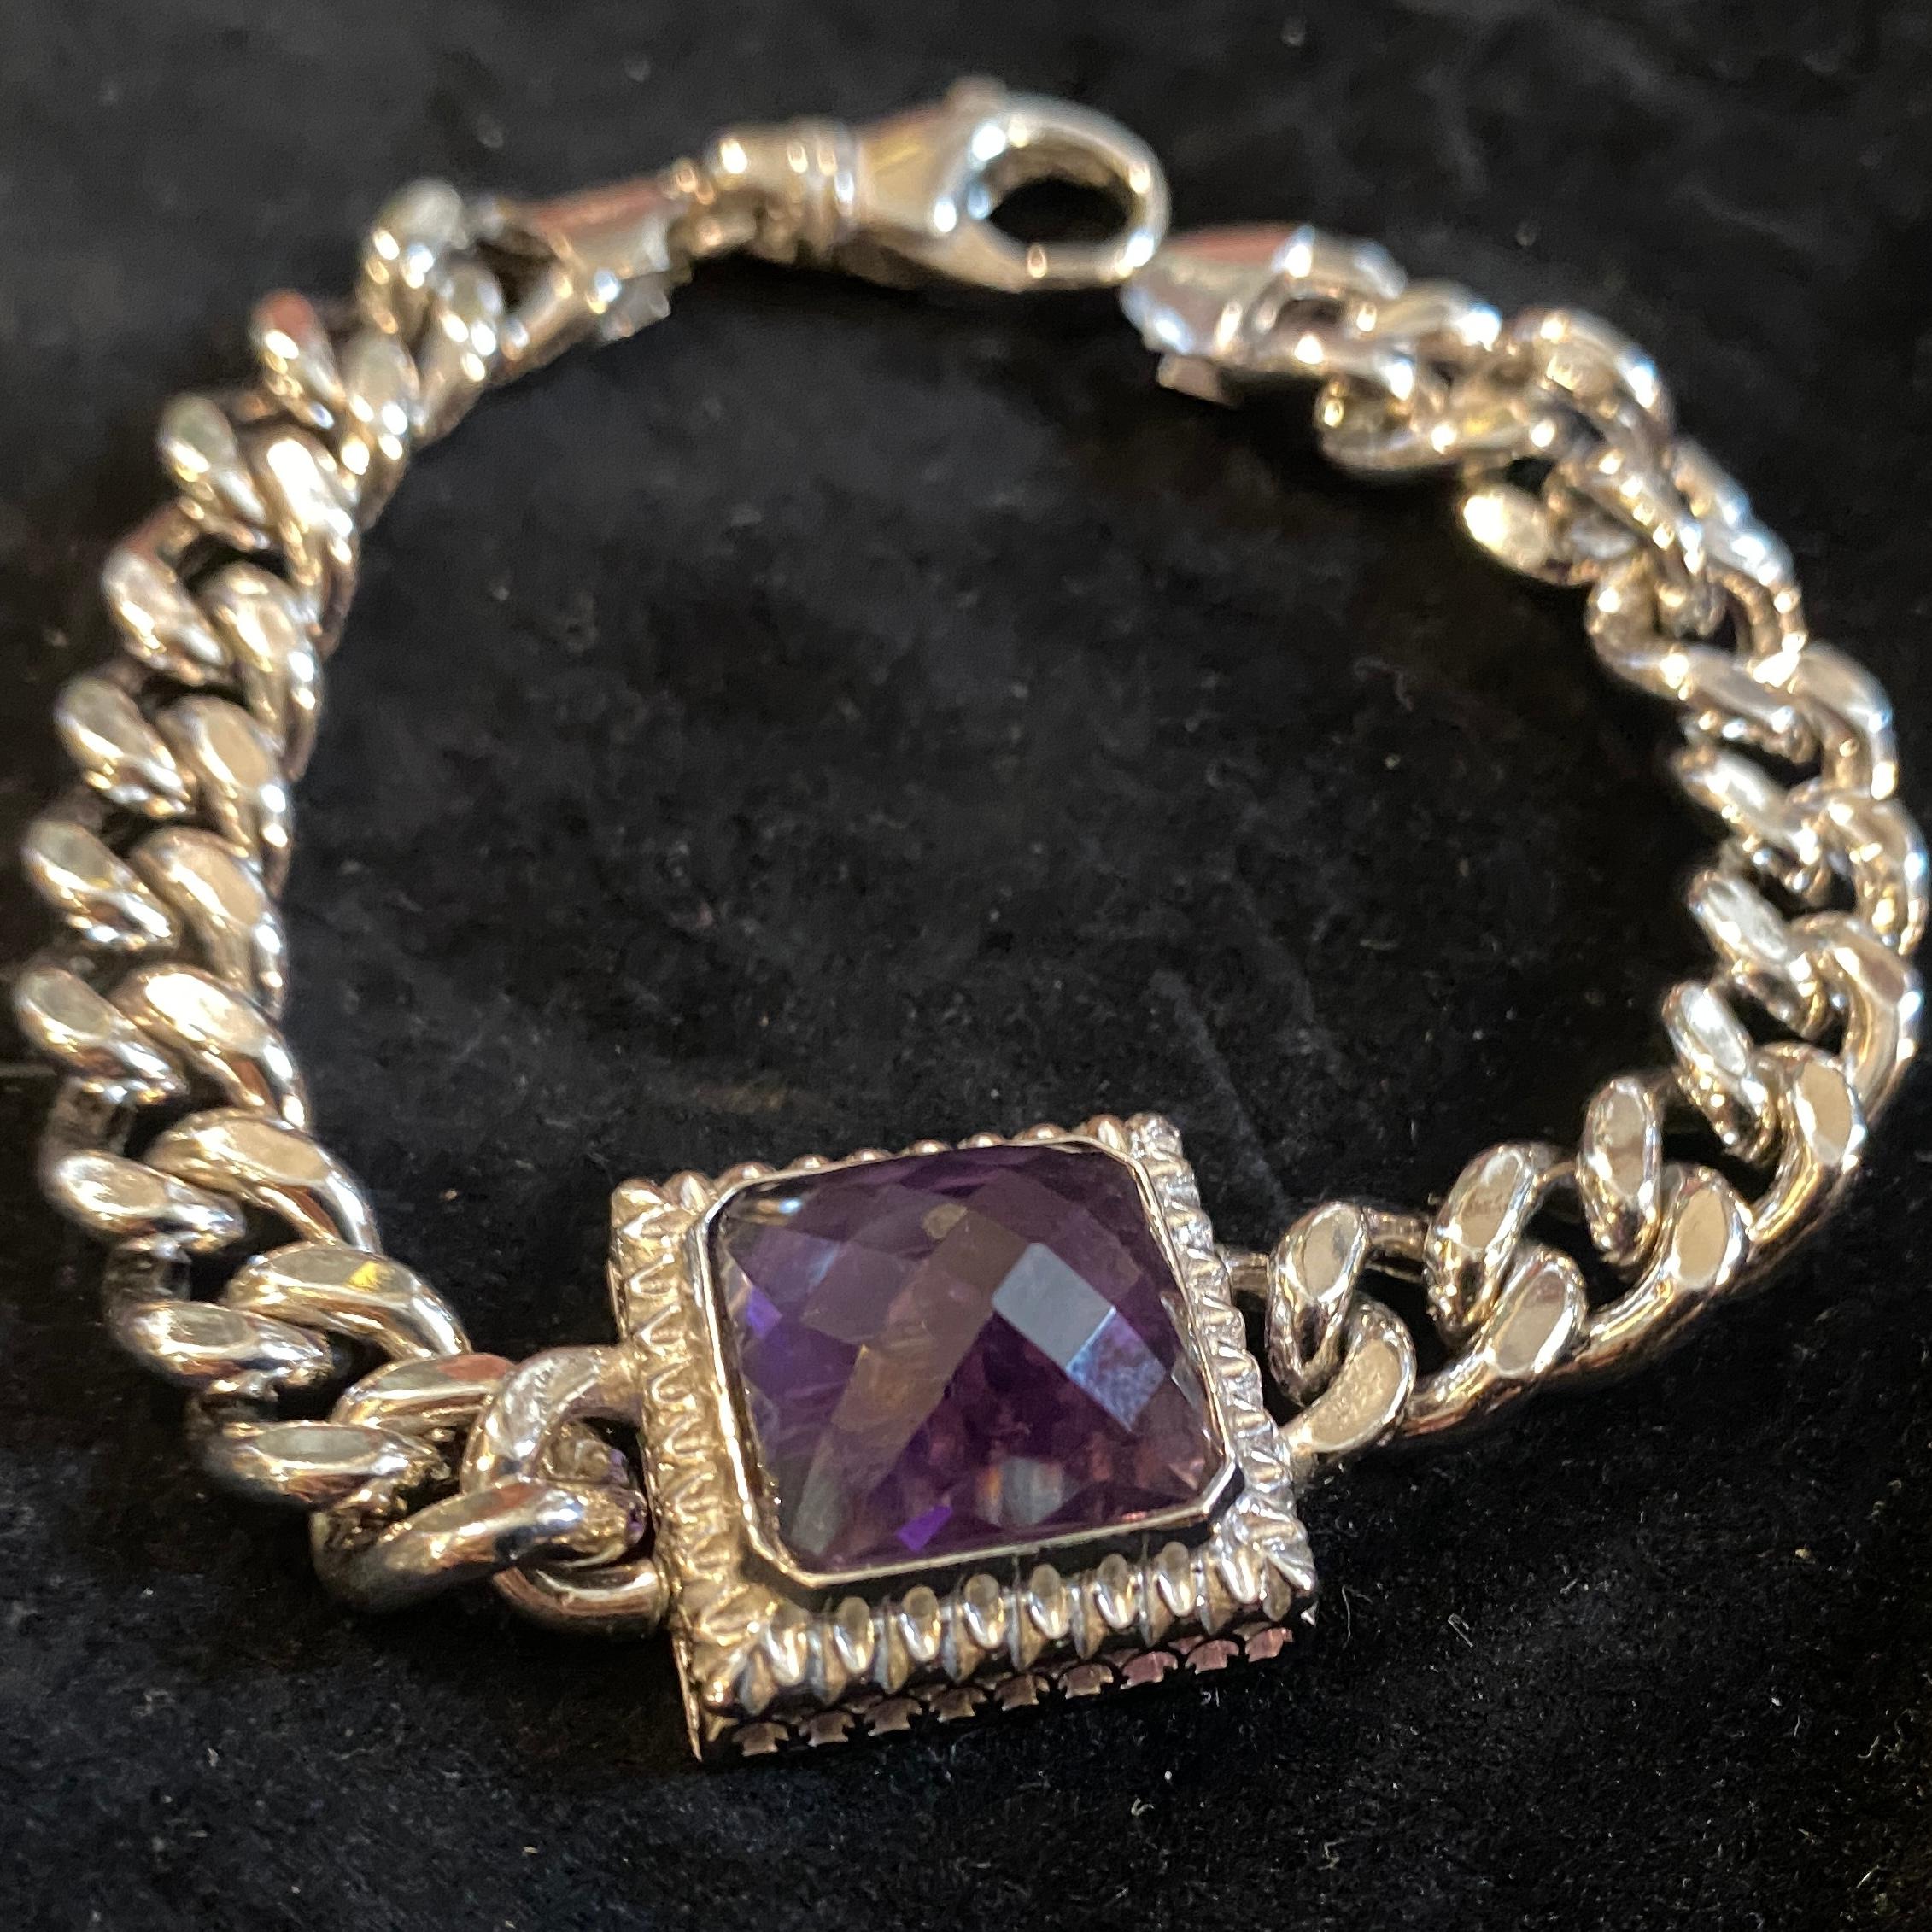 A never worn sterling silver chanel chain bracelet designed and manufactured in Italy in the Nineties by Anomis. This bracelet from the 1990s it's a beautiful and elegant piece of vintage jewelry. Italian jewelry is known for its exceptional